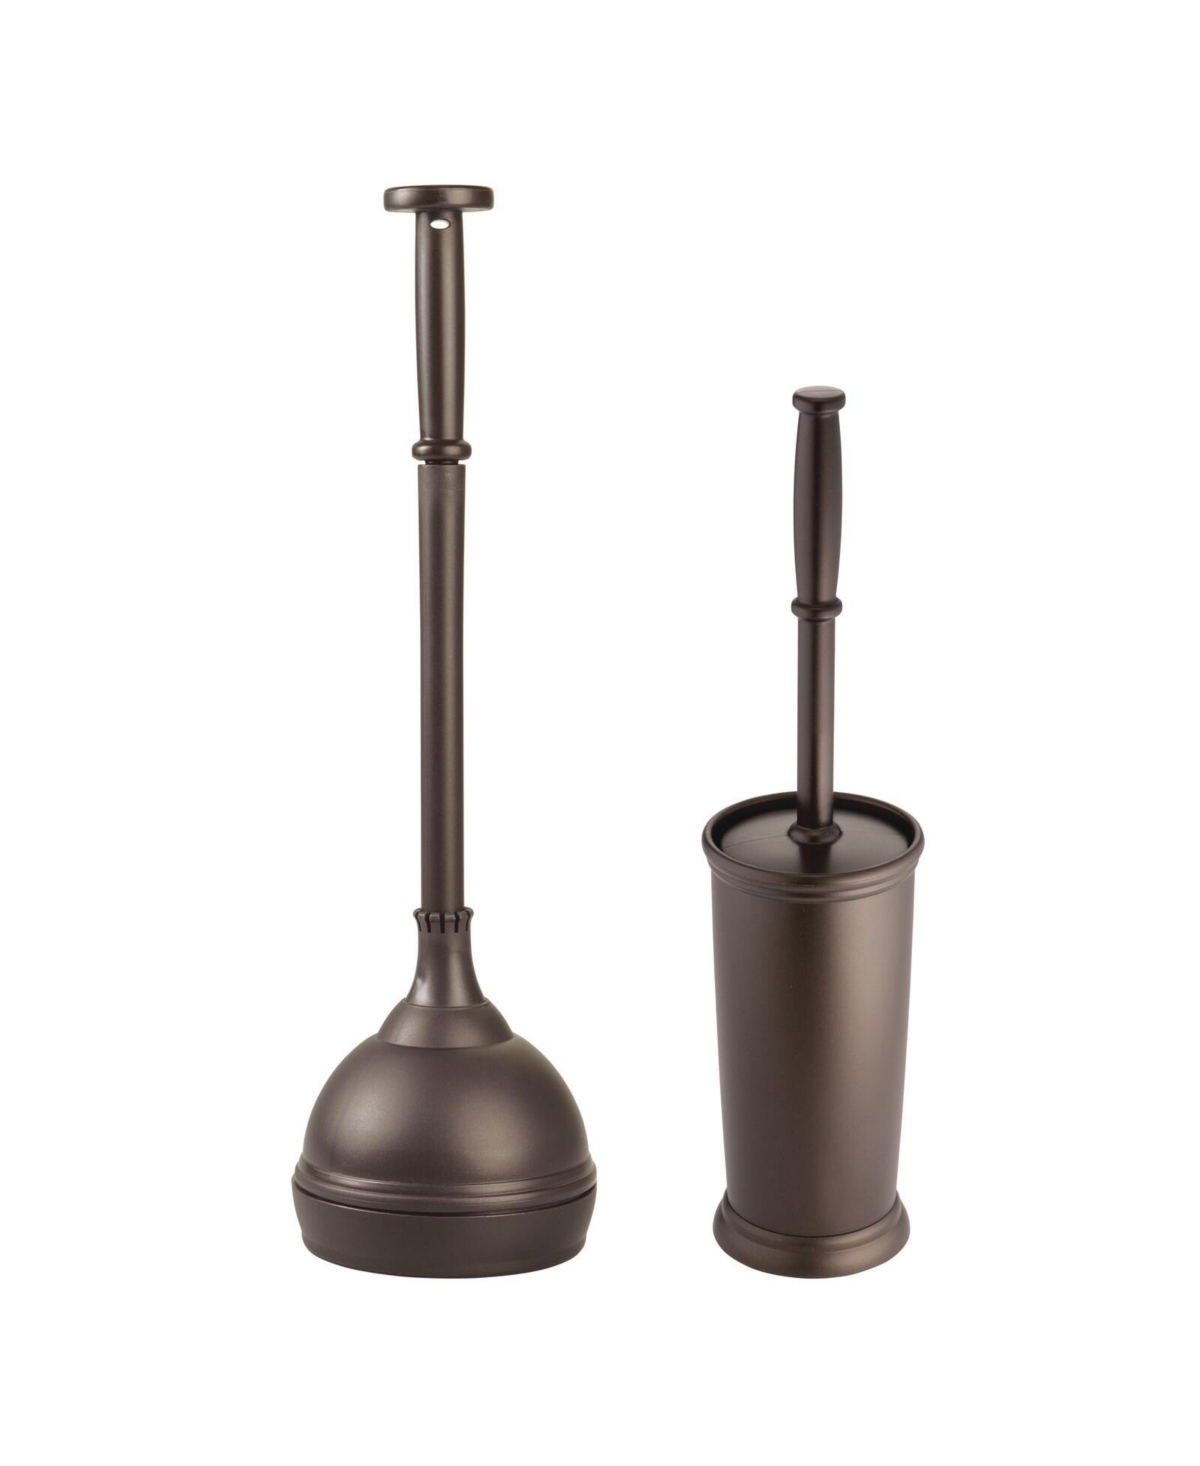 OXO Good Grips Hideaway Toilet Brush and Plunger Combination Set 